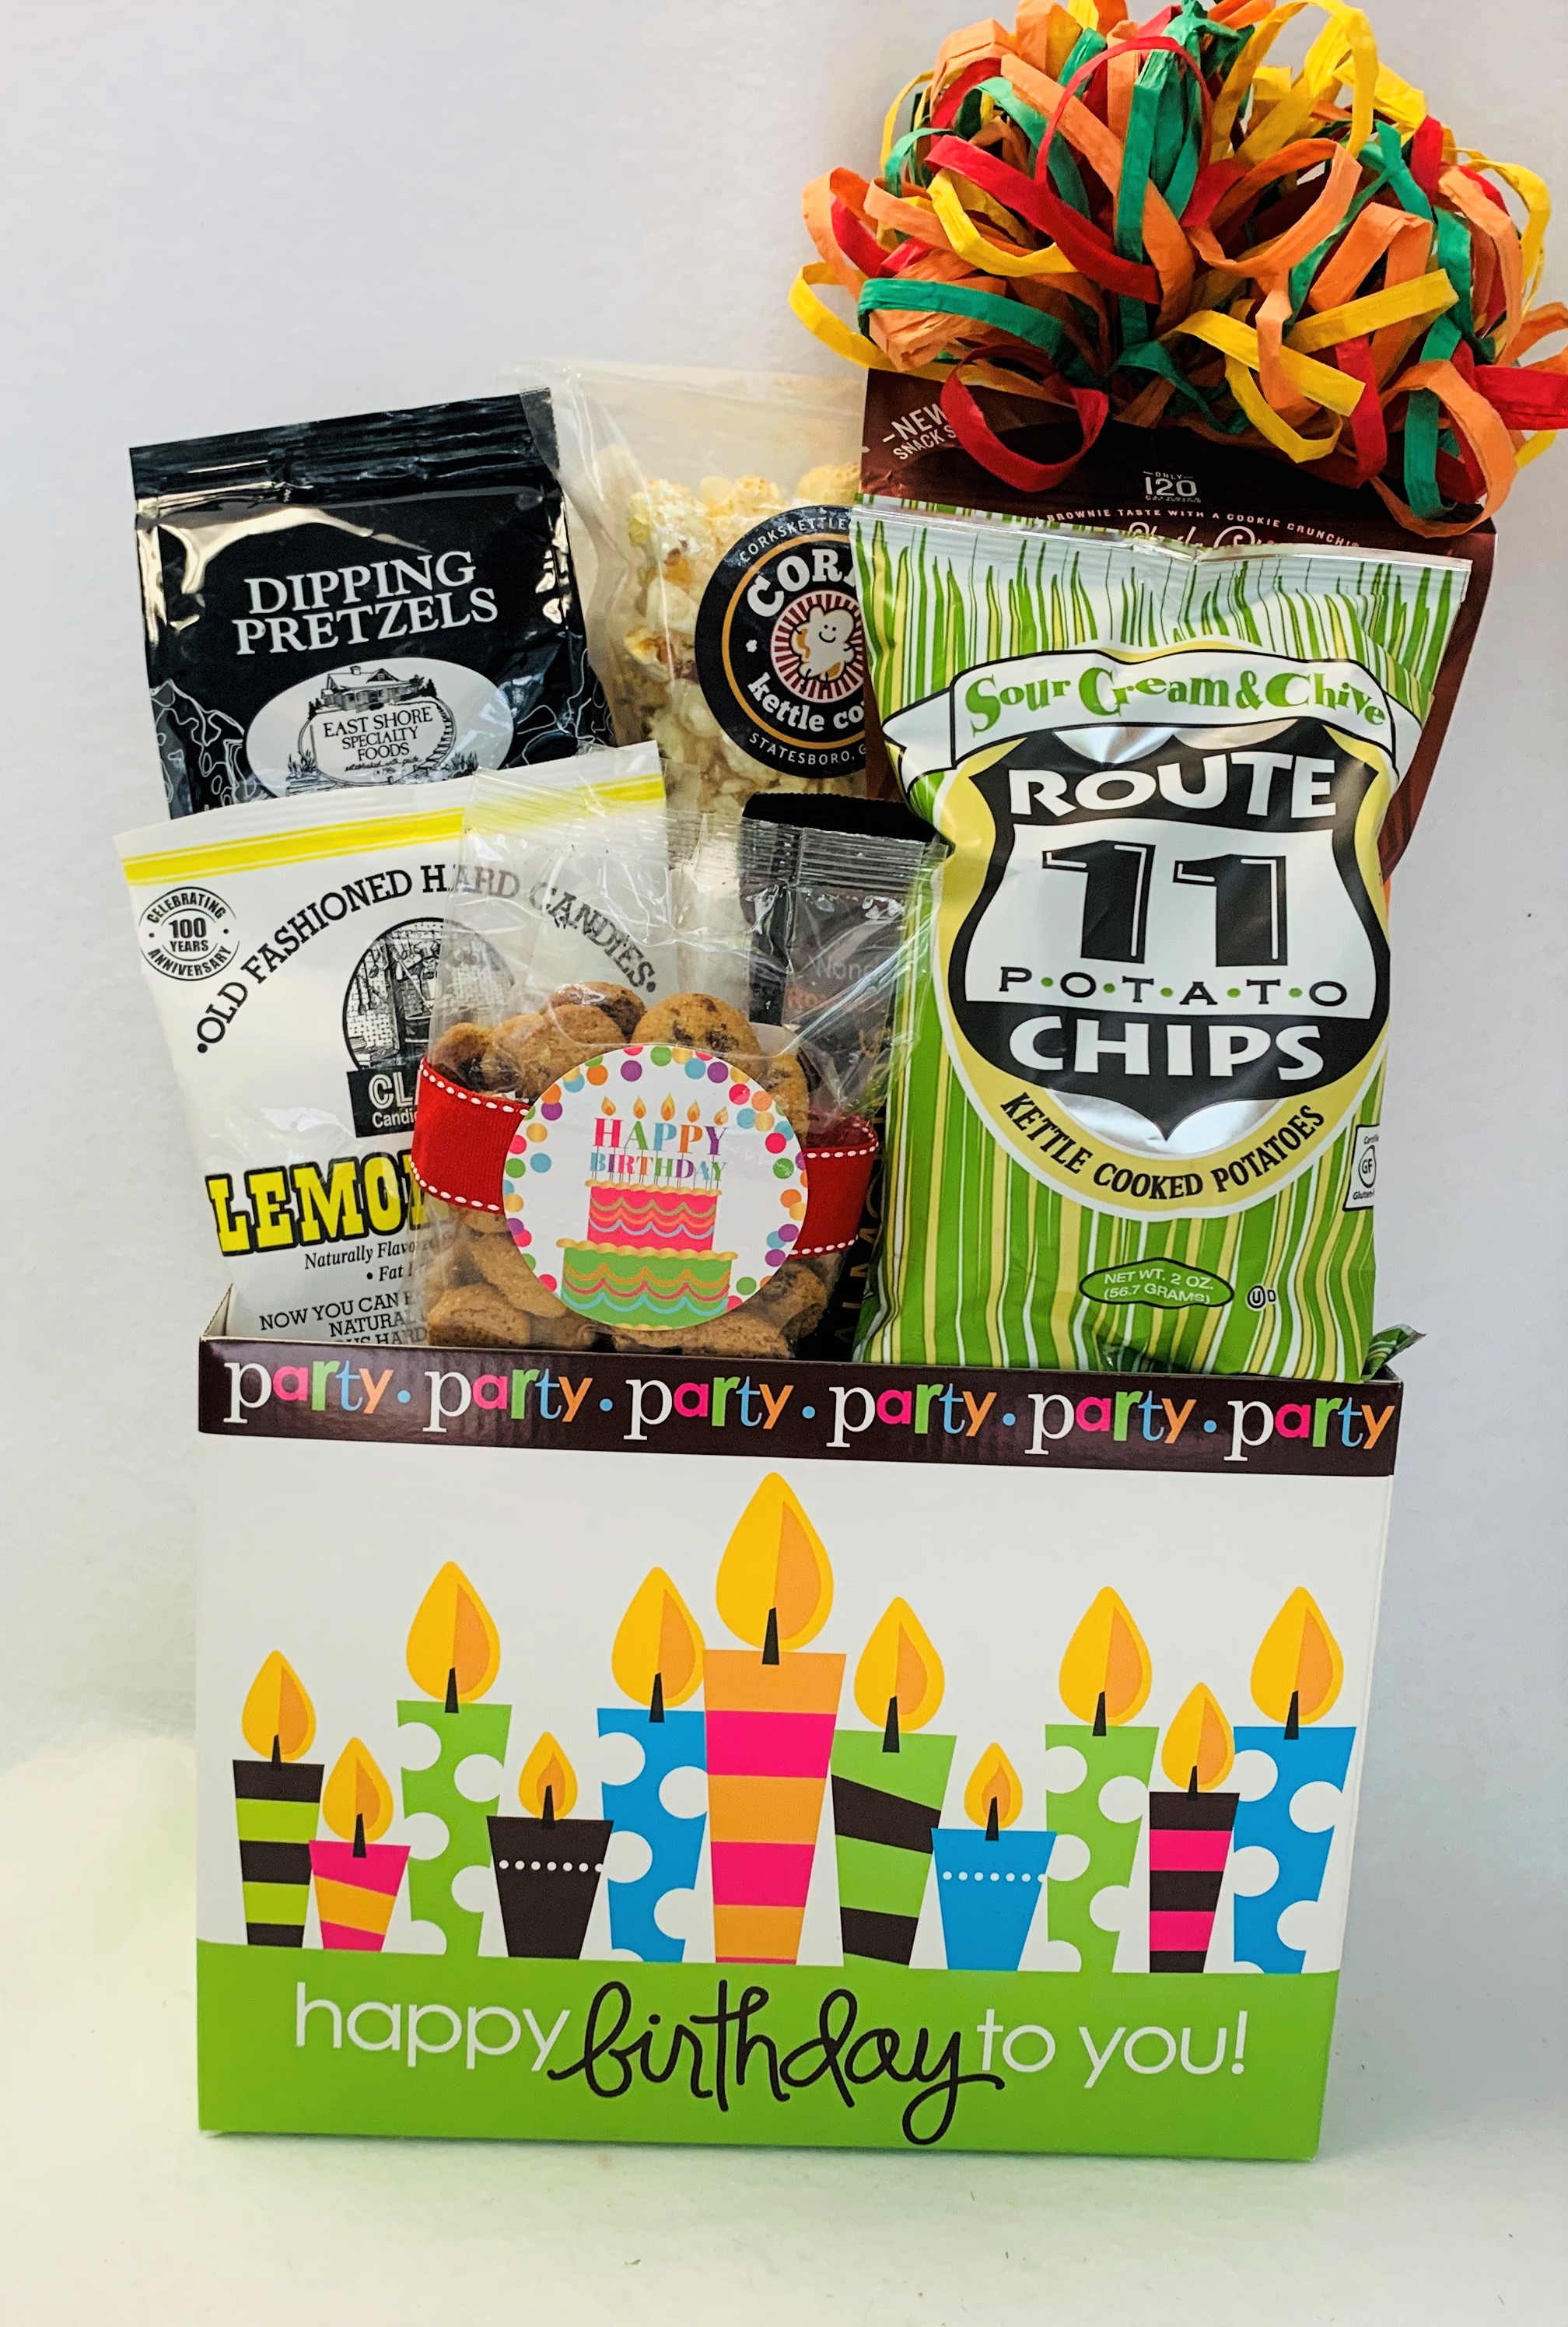 60th Birthday Gift Ideas for Him and for Her | Blog | hampers.com